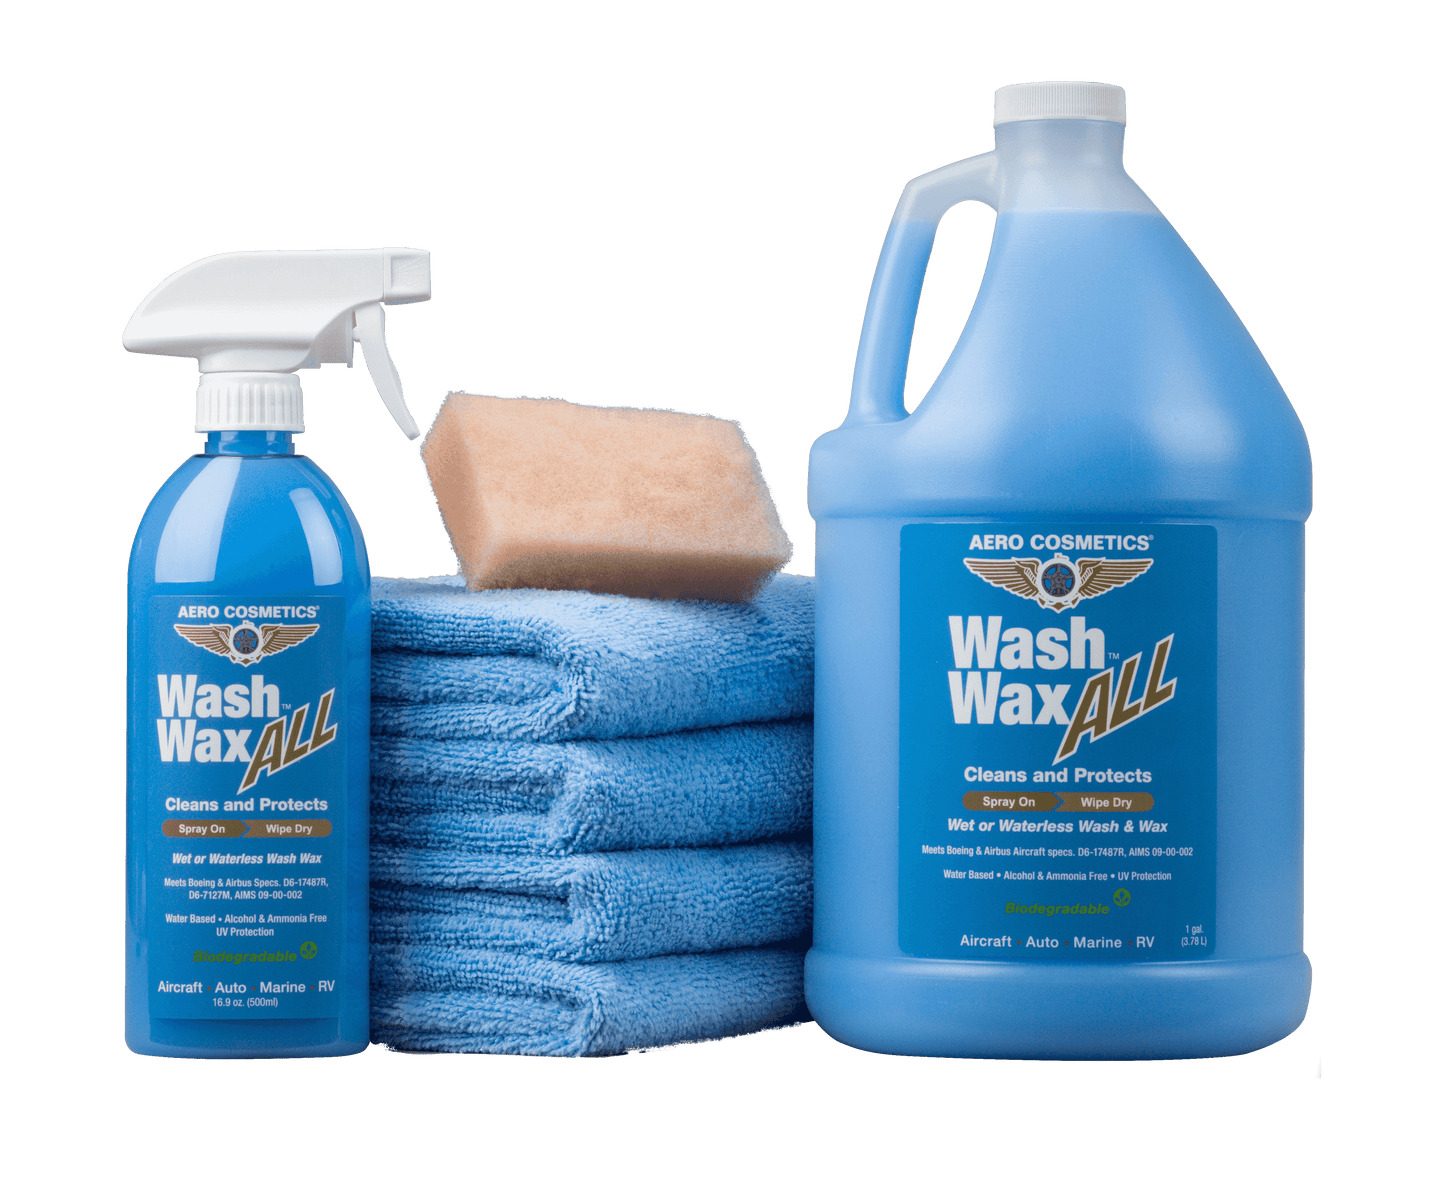 Wet or Waterless Car Wash Wax Kit 144 Ounces. Aircraft Quality for Your Car, RV, Boat, Motorcycle. The Best Wash Wax. Anywhere, Anytime, Home, Office, School, Garage, Parking Lots. Aero Cosmetics